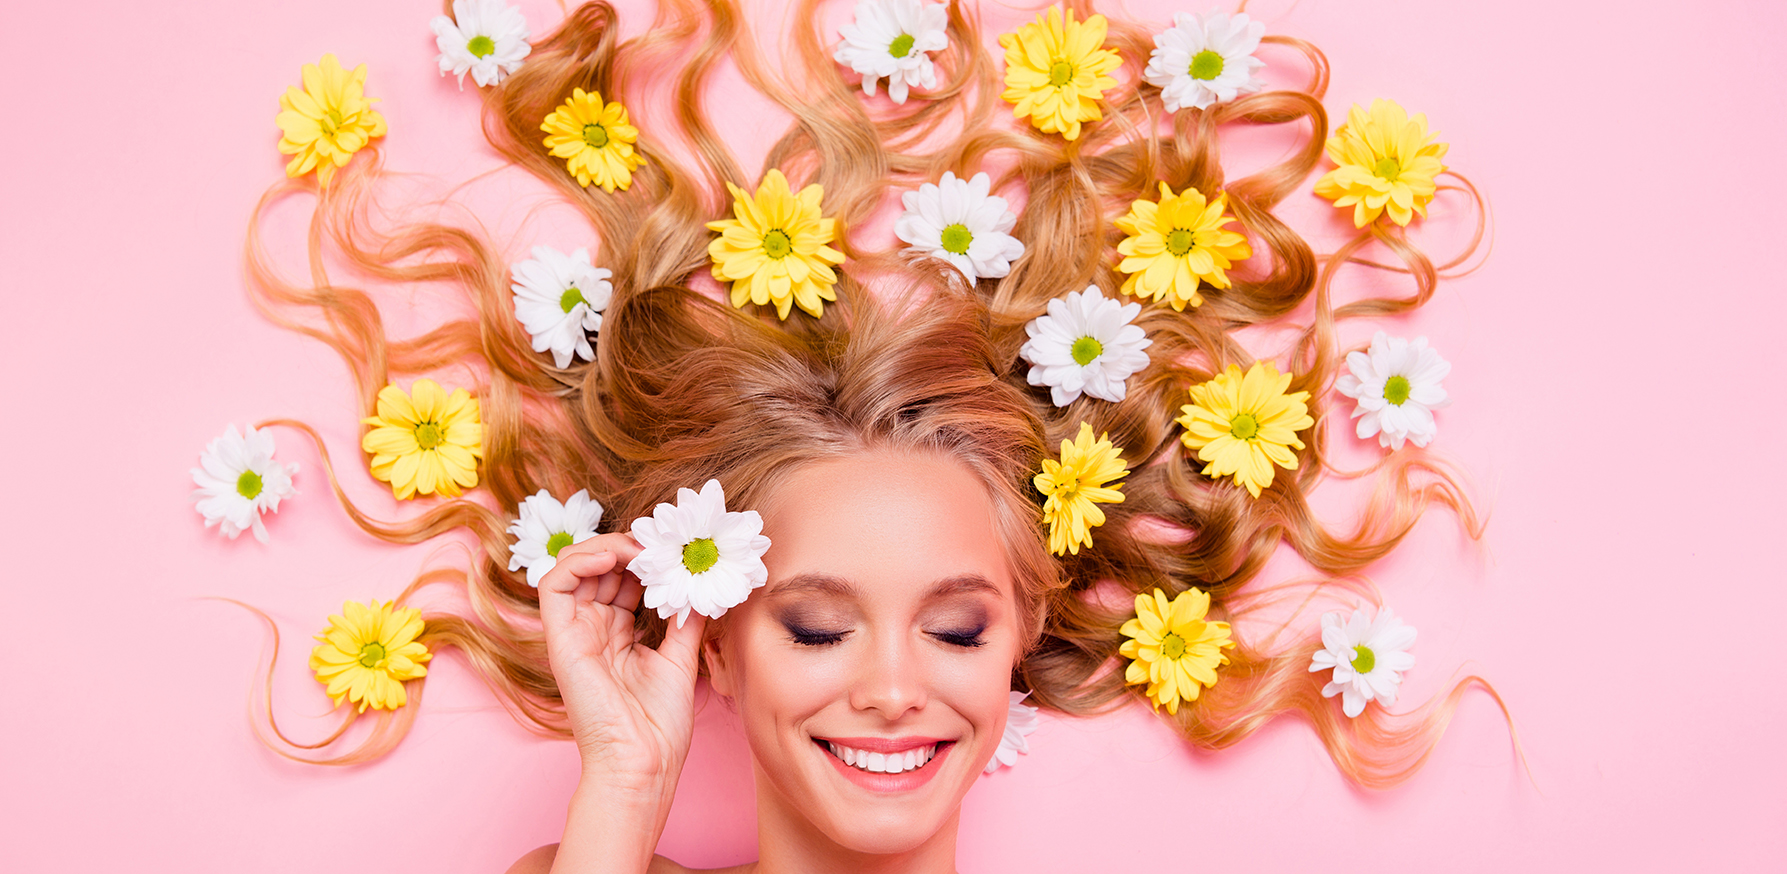 plant-based-ingredients-you-want-in-skincare-woman-with-flowers-in-hair